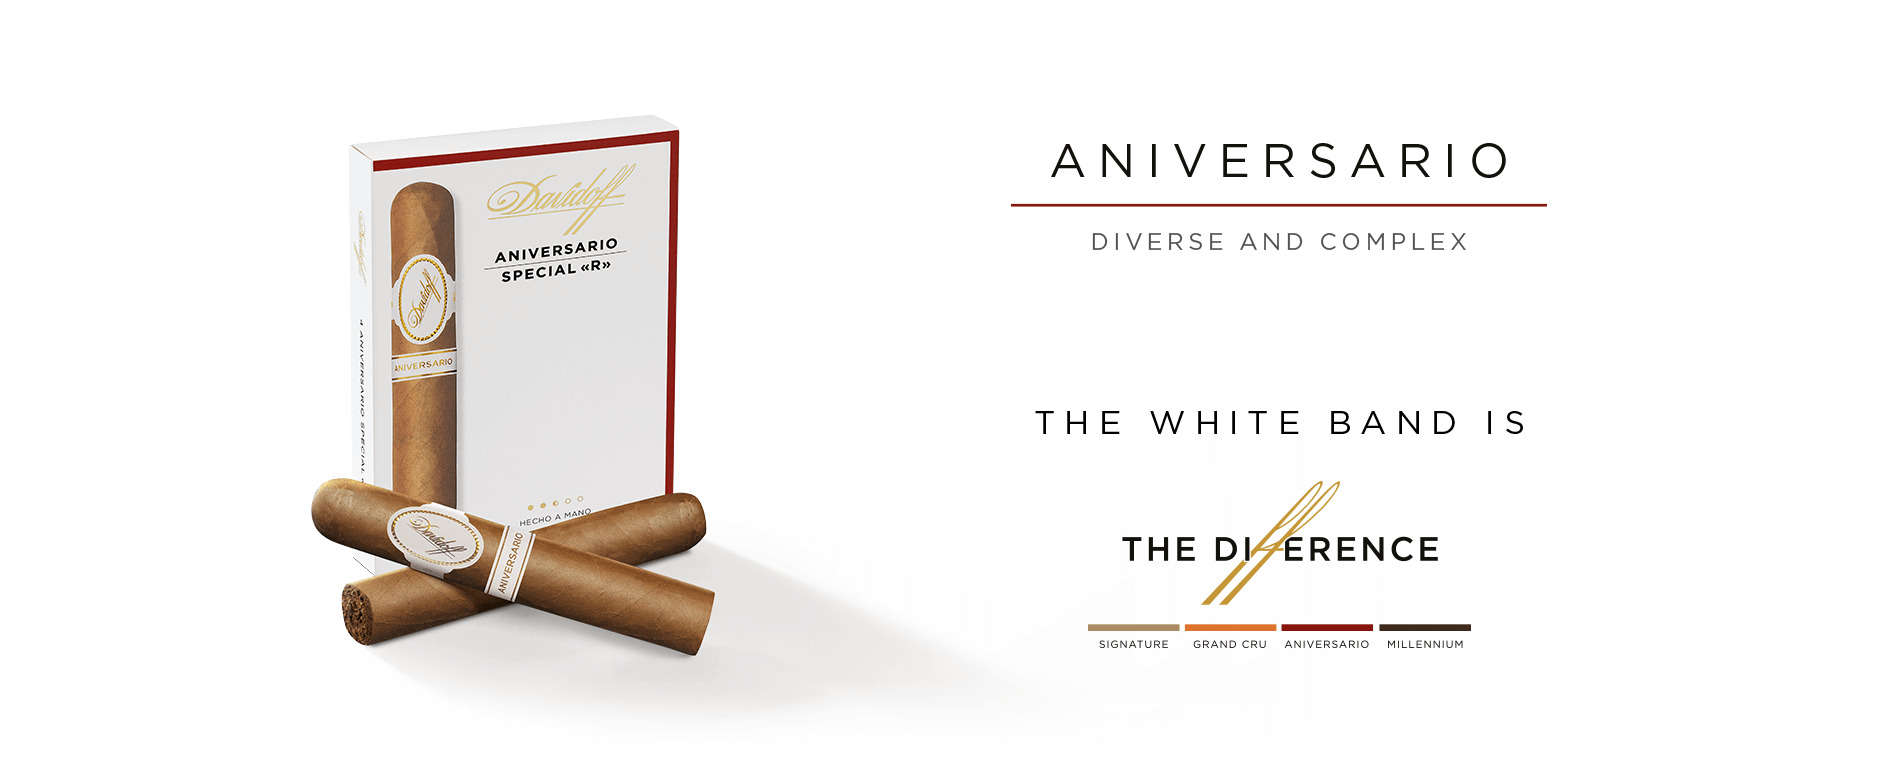 A box of Davidoff Aniversario Special R with two cigars placed crosswise in front of it. 